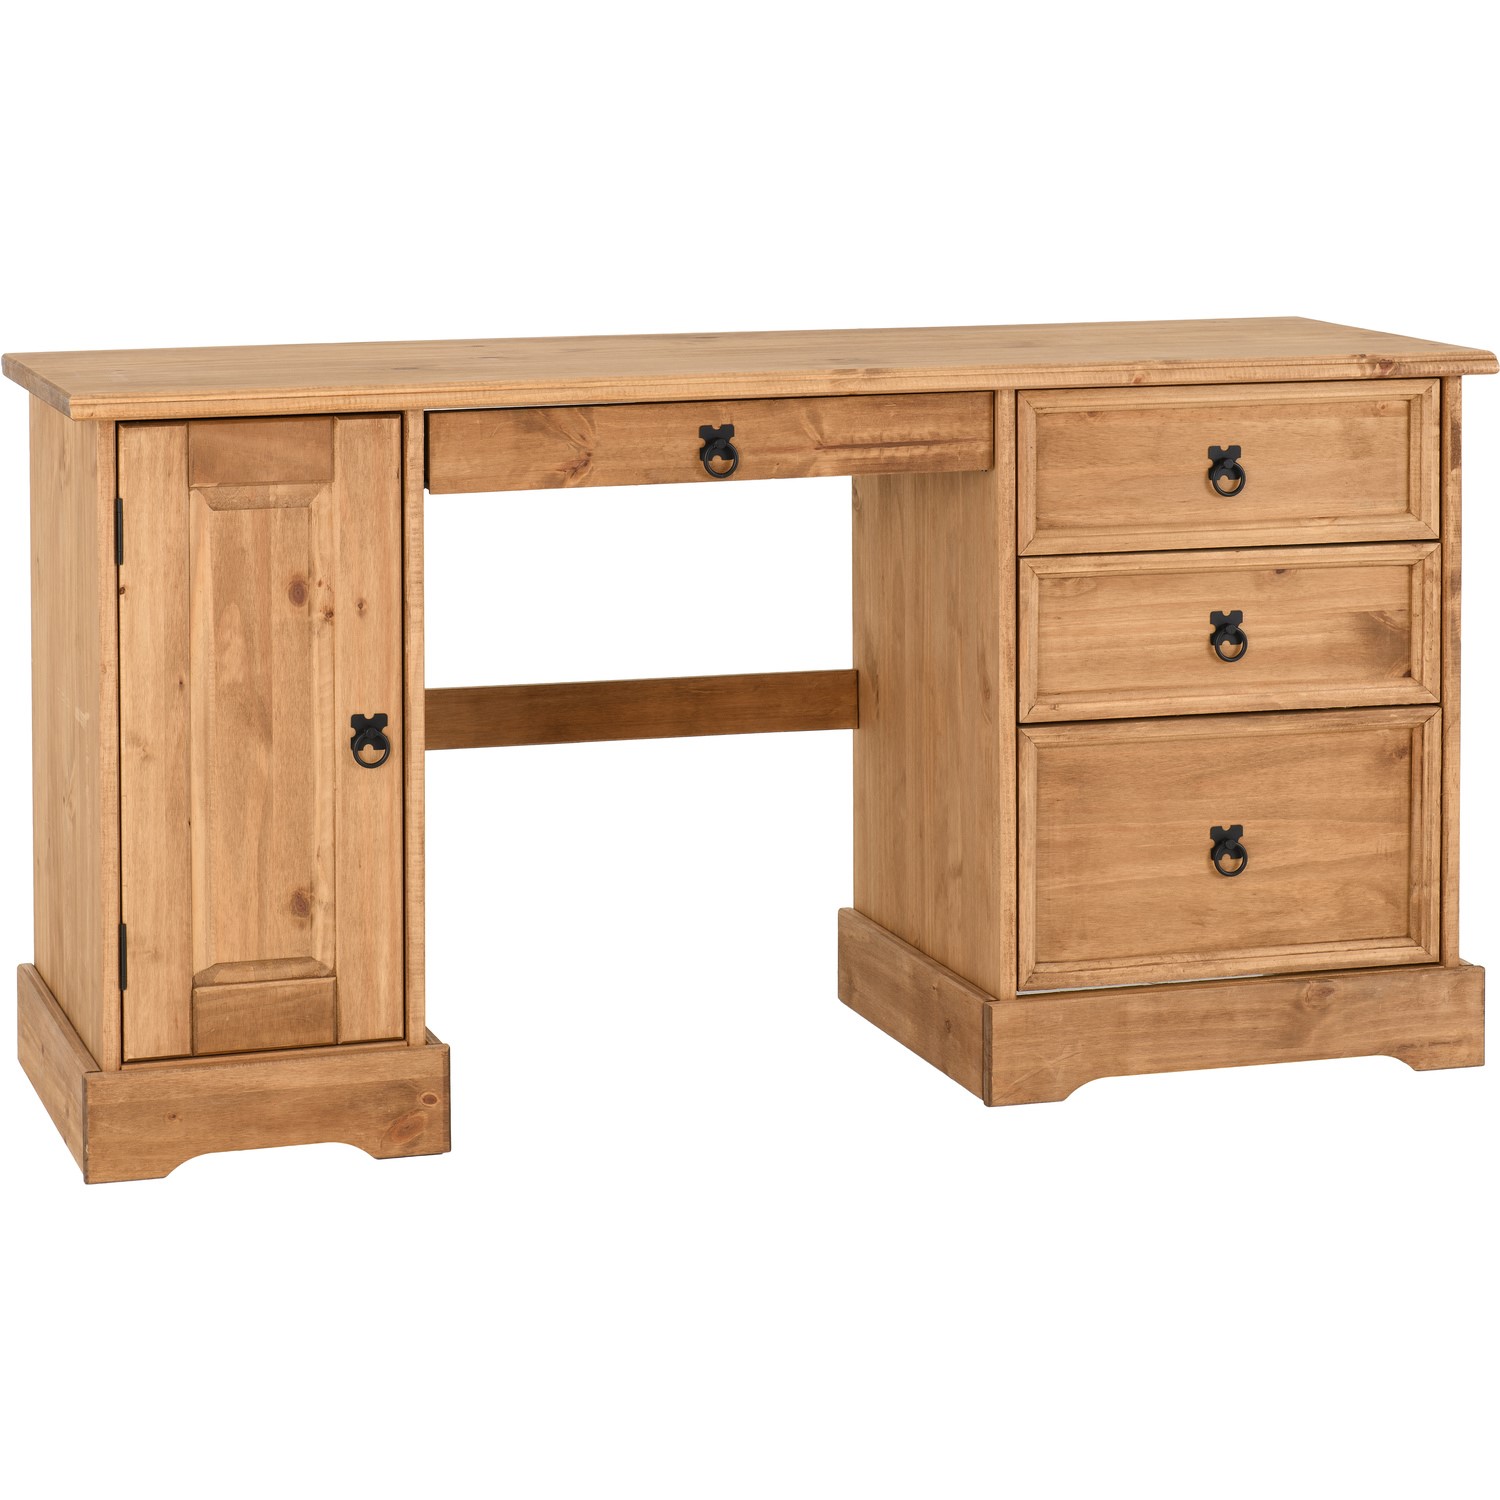 Read more about Pine office desk with 4 drawers corona seconique